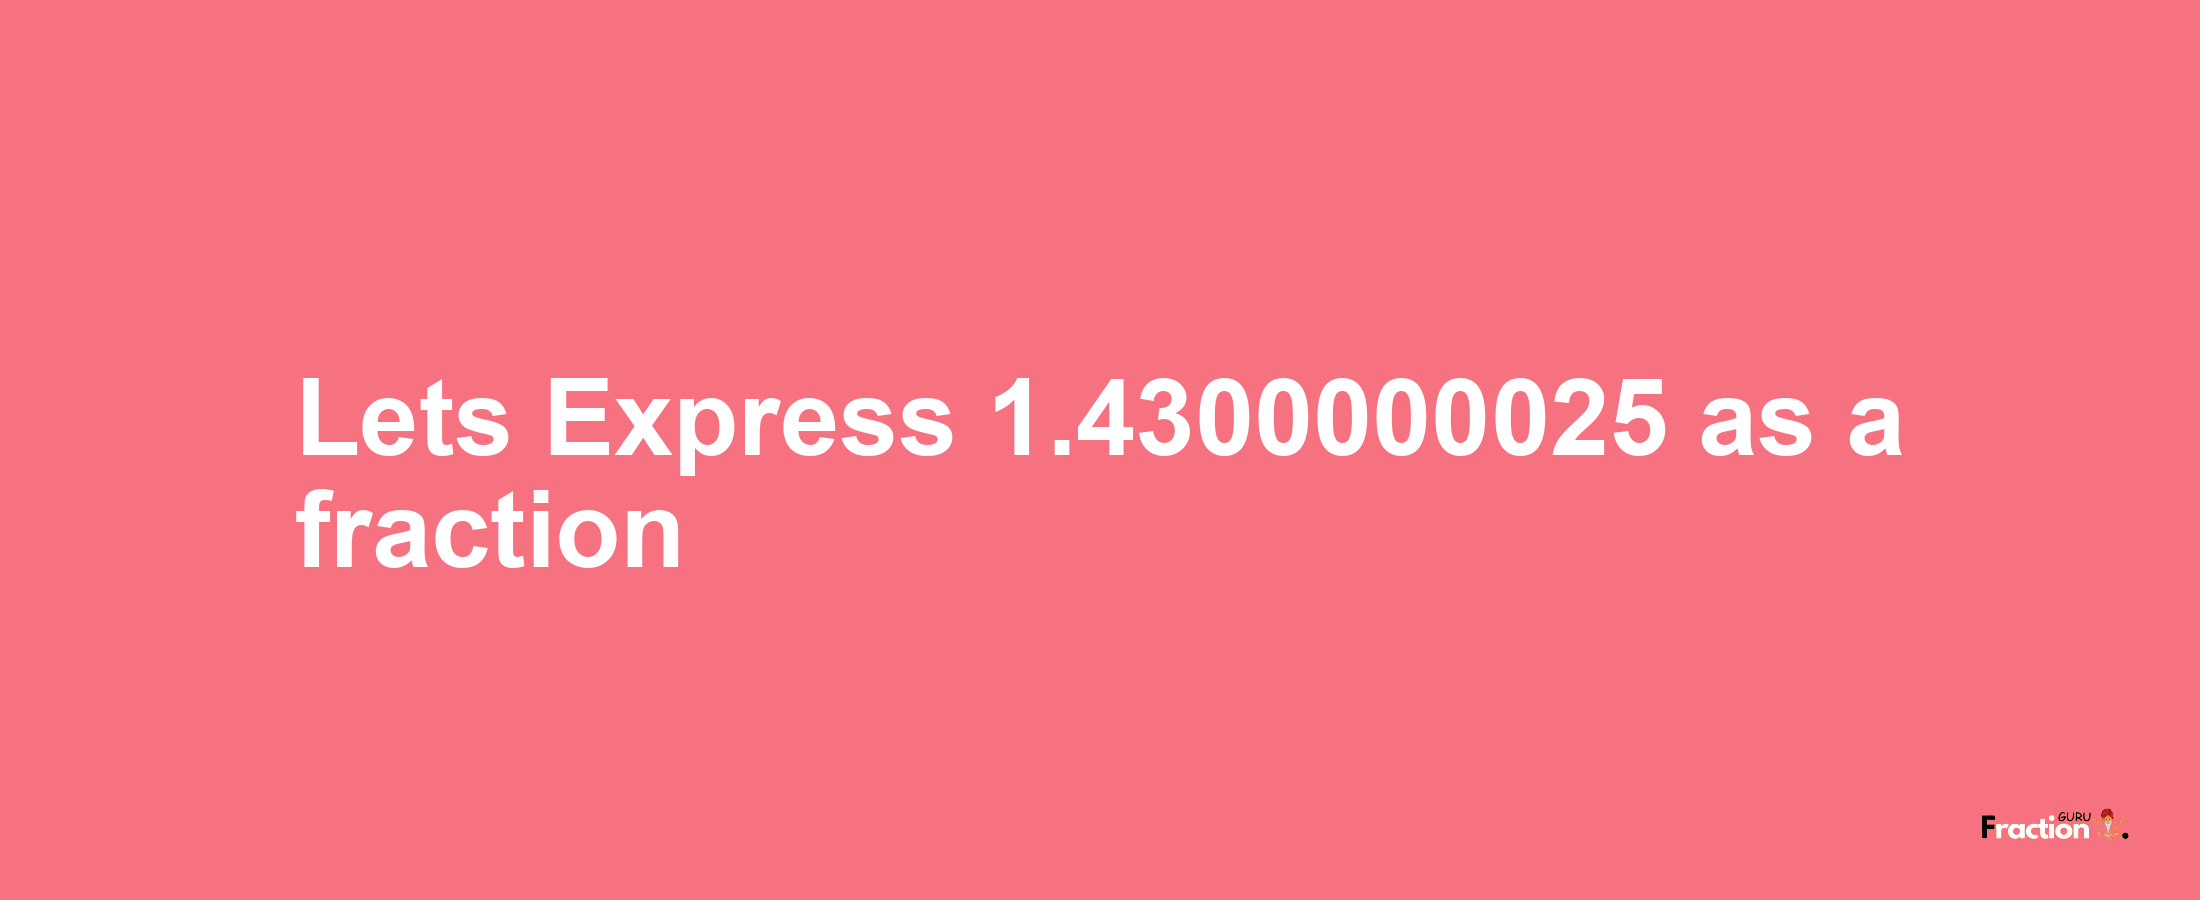 Lets Express 1.4300000025 as afraction